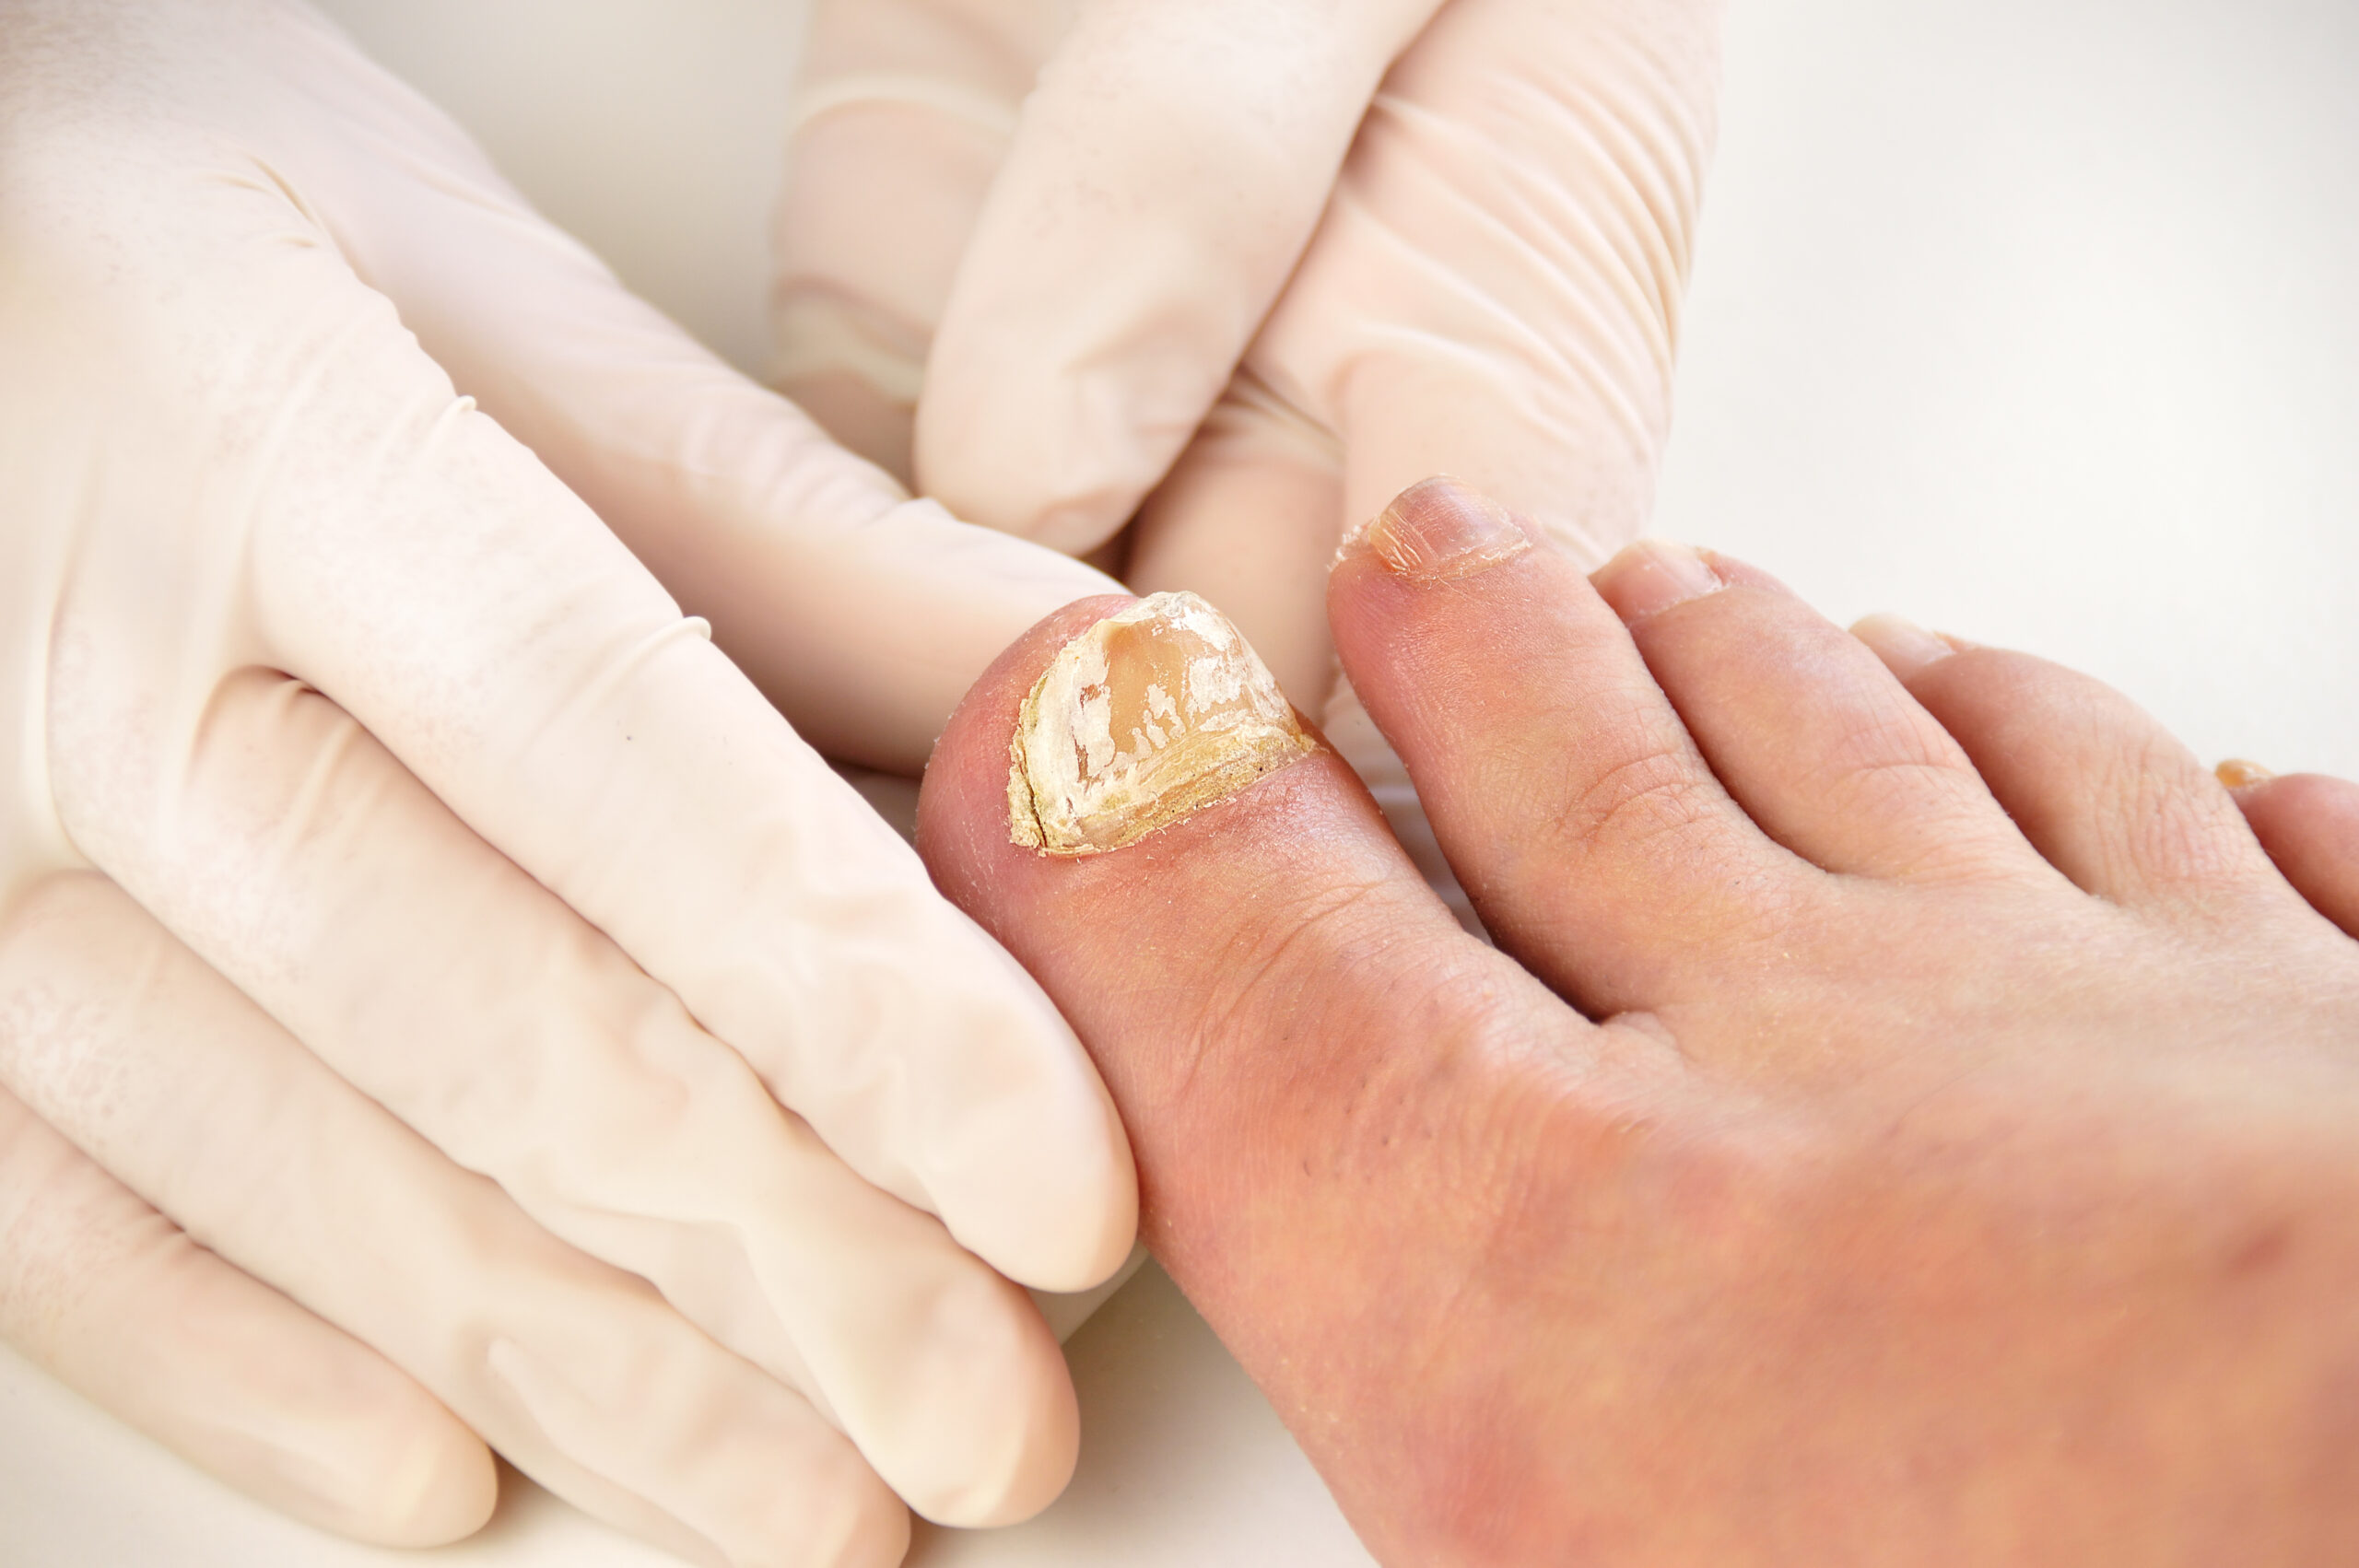 Closeup image of podologist examining the left foot toe nail suffering from fungus infection. horizontal studio picture on white background.